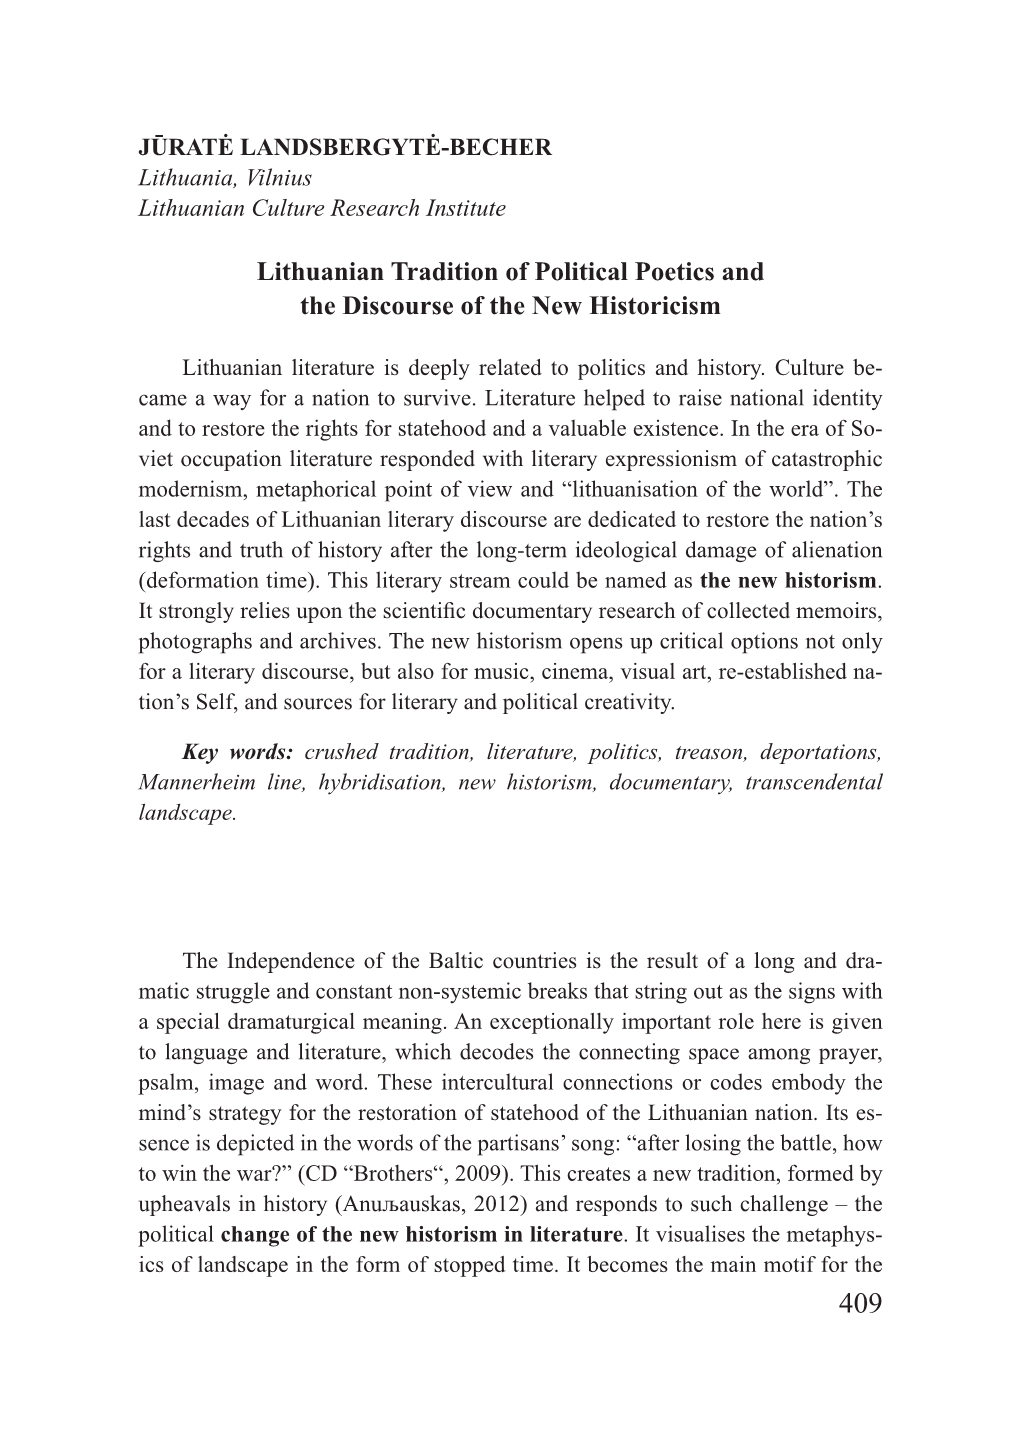 Lithuanian Tradition of Political Poetics and the Discourse of the New Historicism